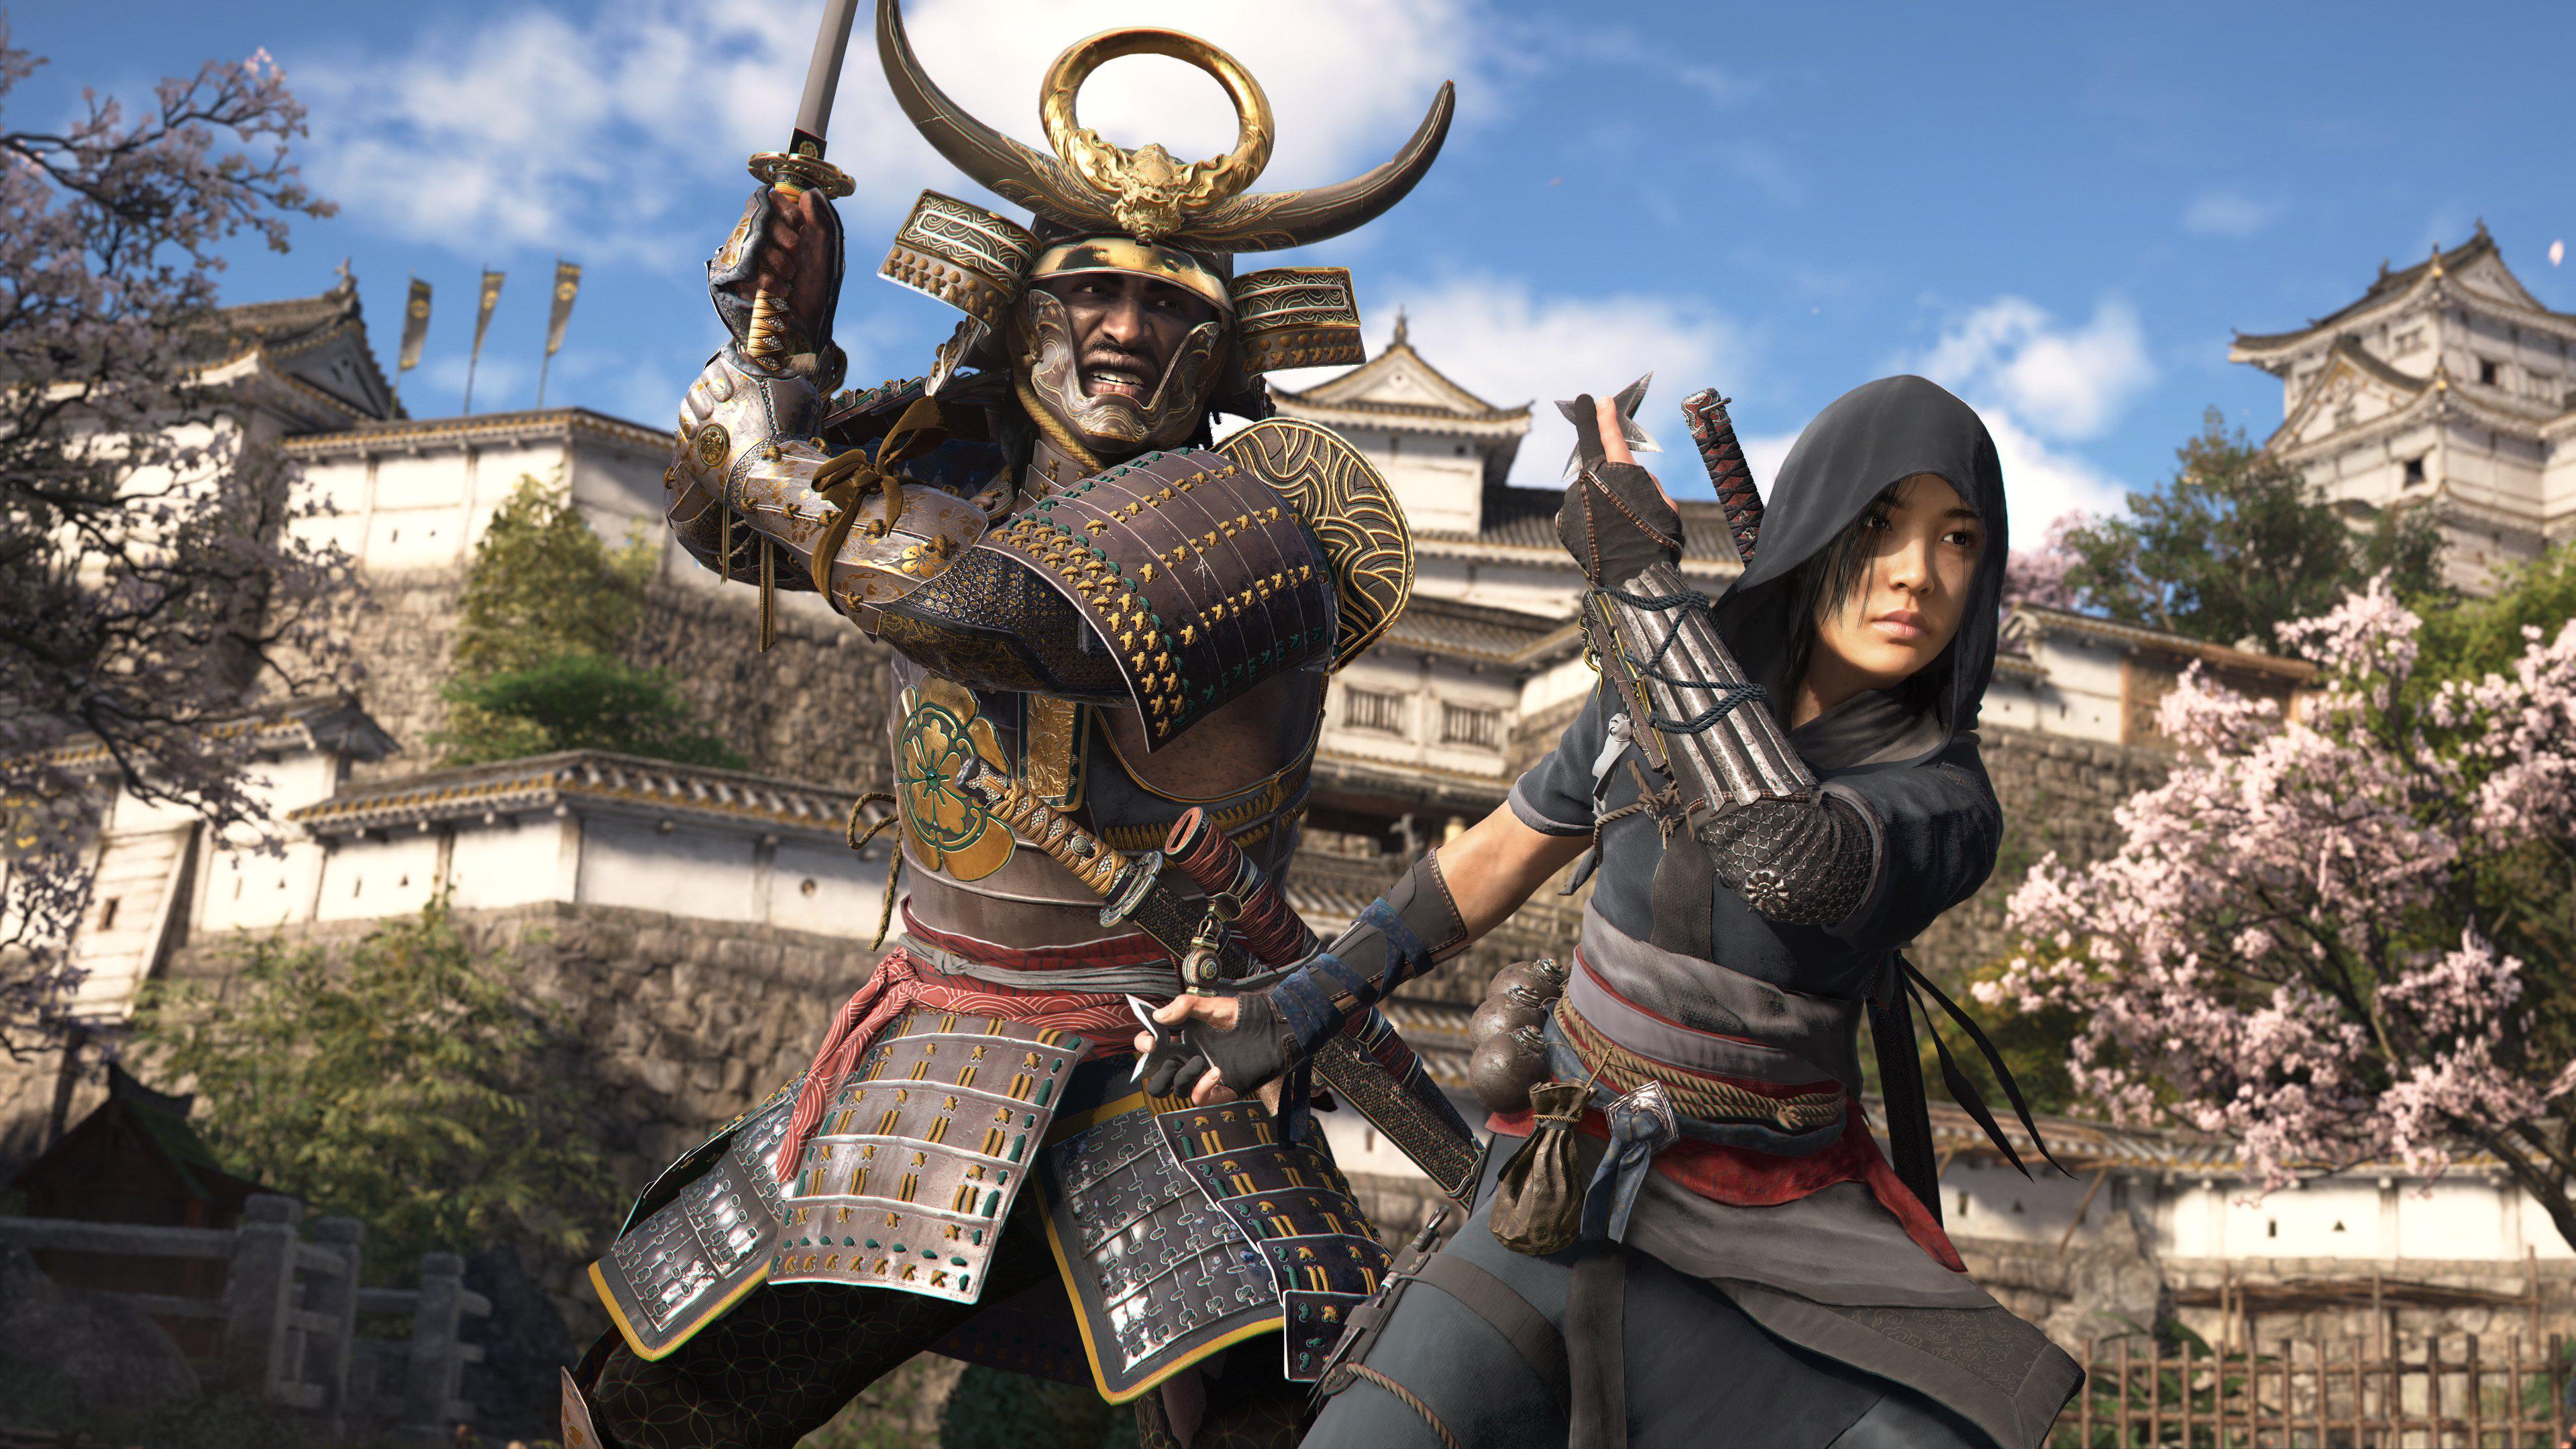 Assassin’s Creed Shadows: A Feudal Japan Adventure with two Main Characters and a Pre-Order Bonus Mission